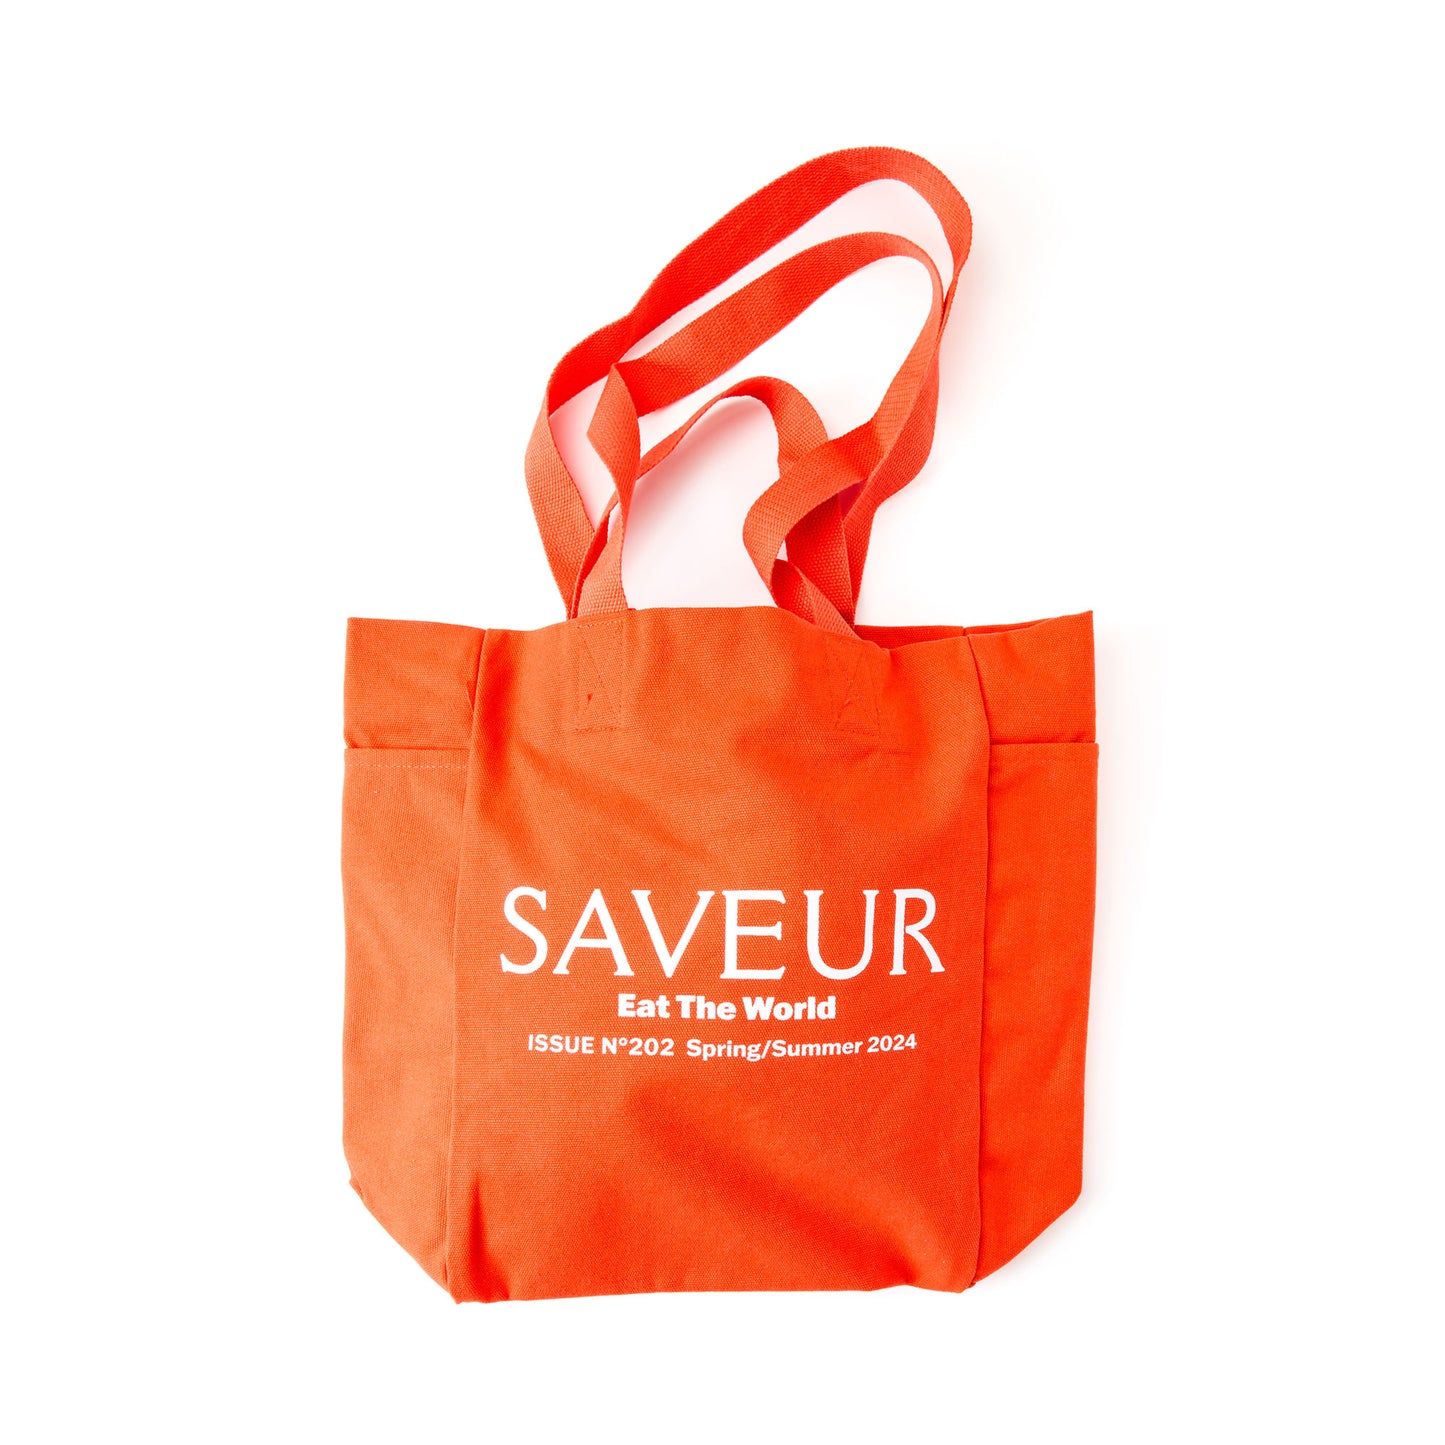 SAVEUR Issue No. 202 Spring/Summer 2024 Market Tote